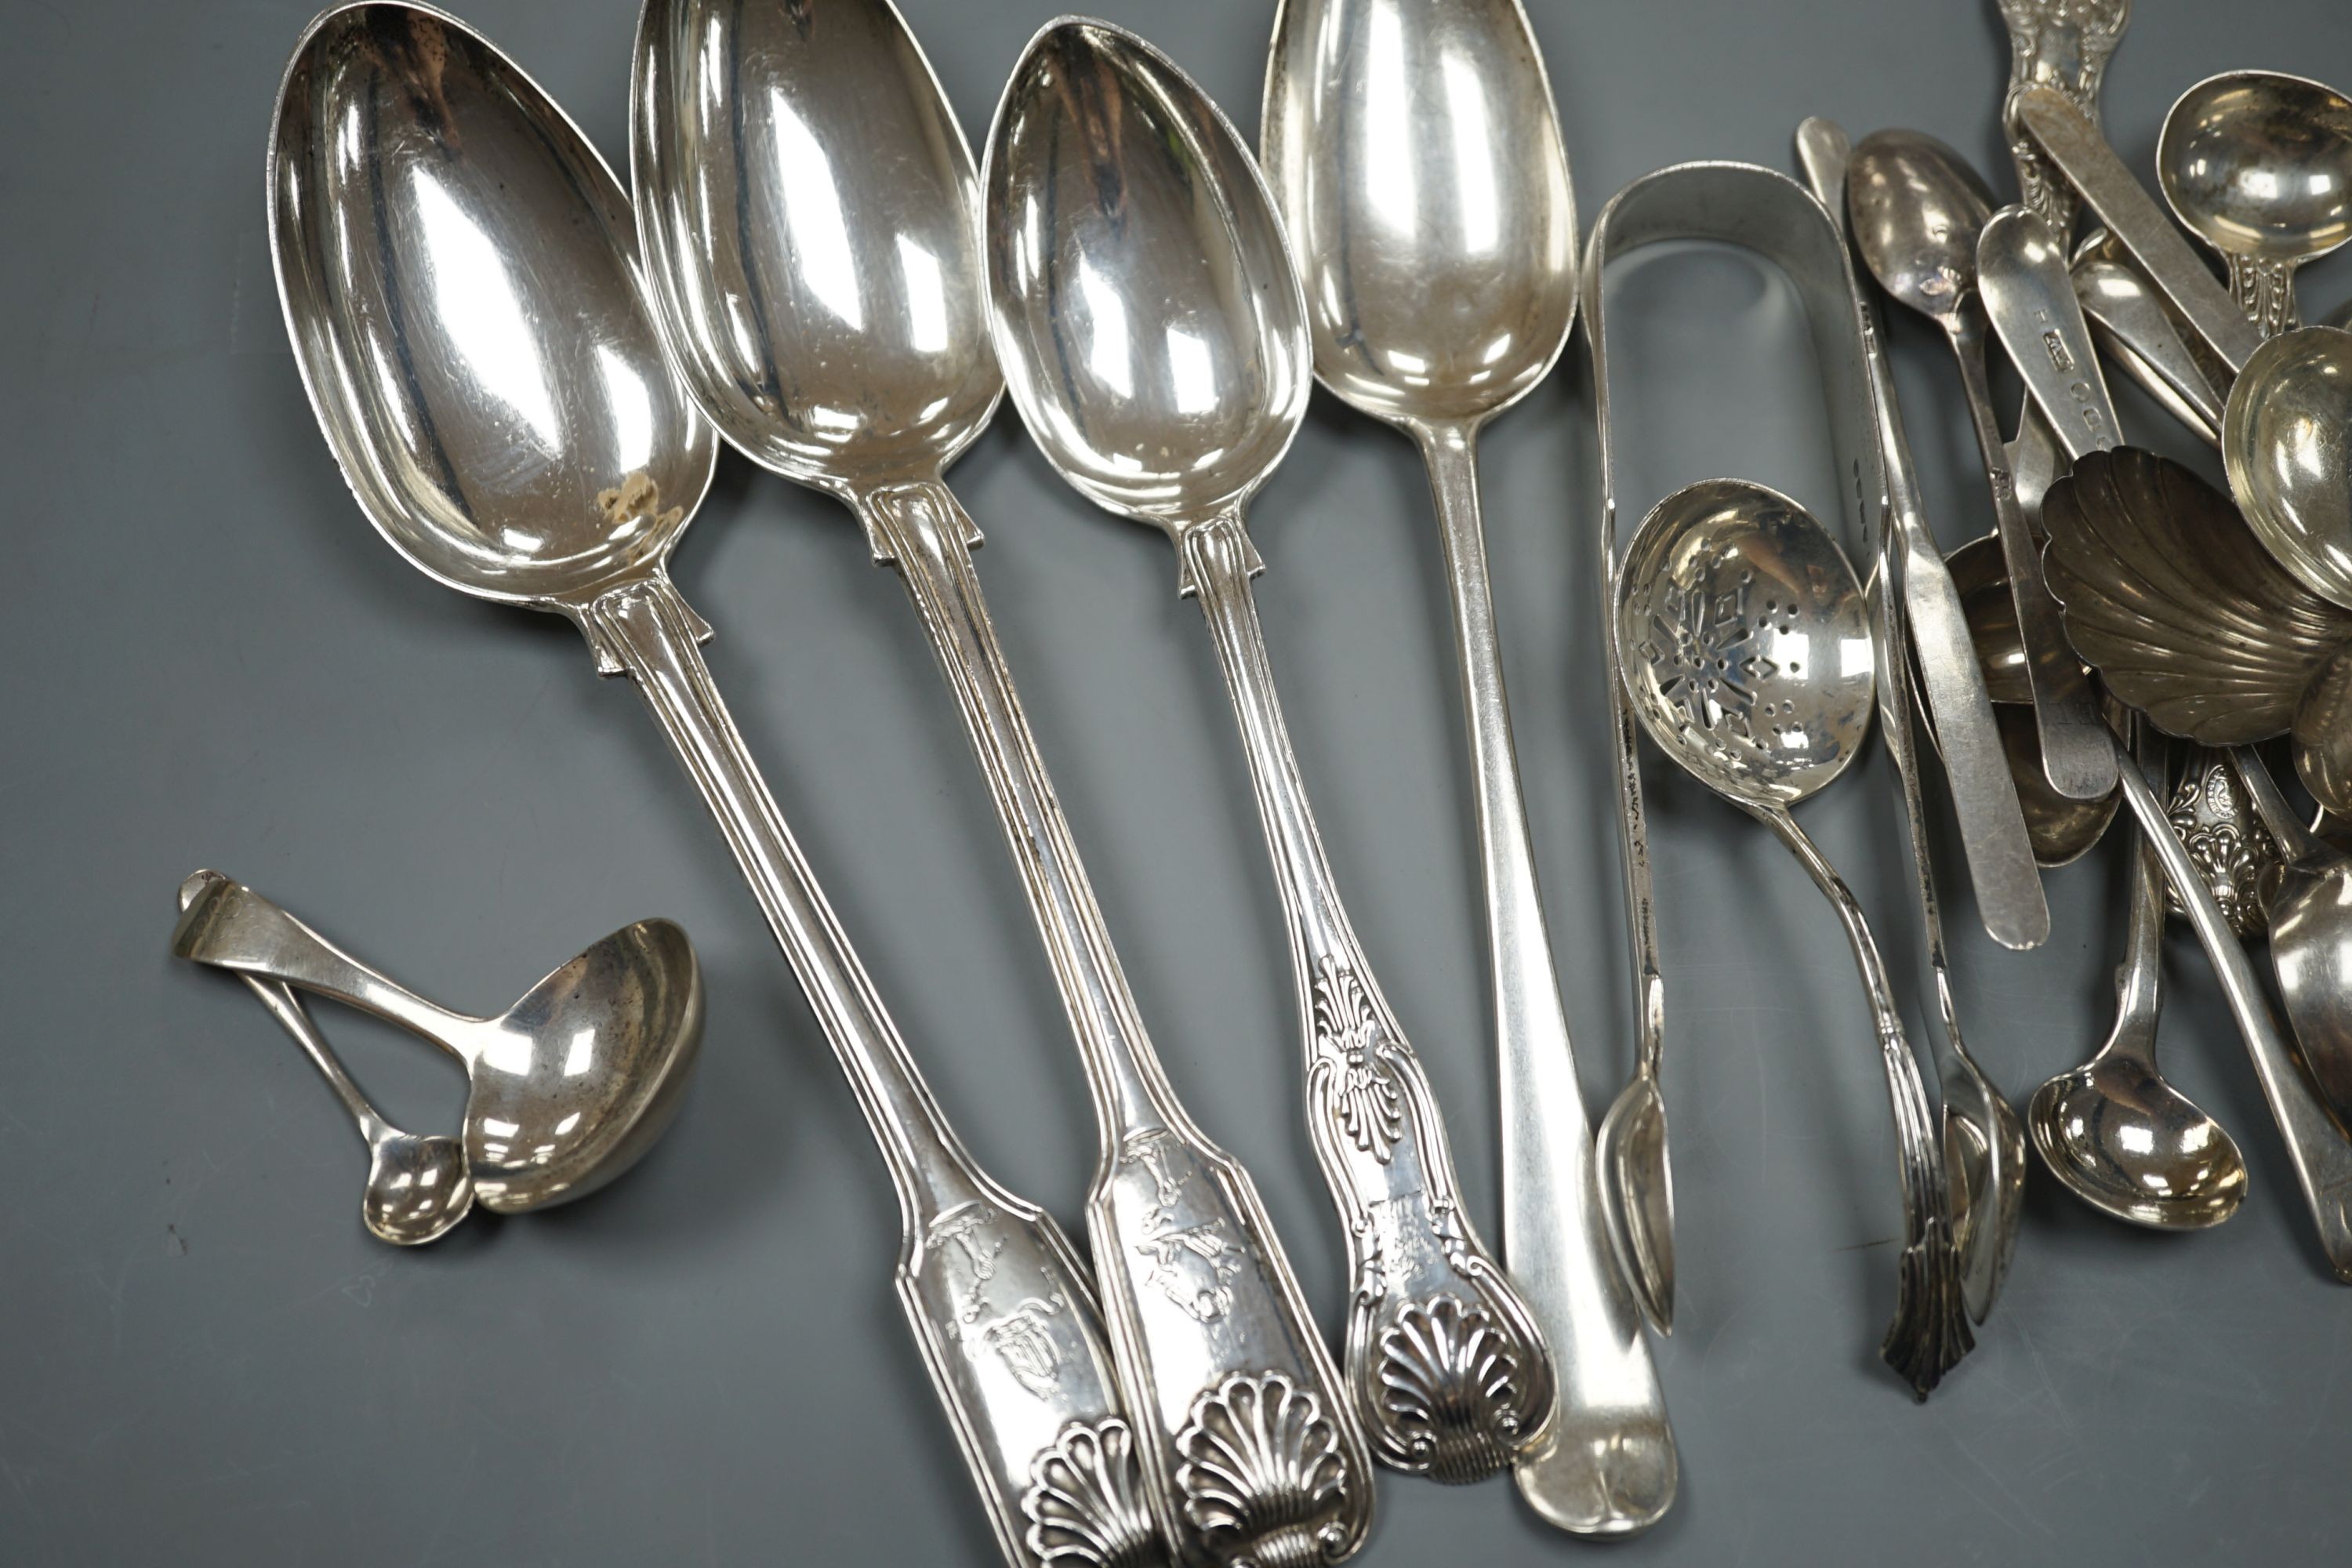 A quantity of assorted mainly 19th century and later flatware, including two Georgian caddy spoons, Victorian tablespoons, an 18th century tablespoon and assorted condiment spoons, various dates and maker's